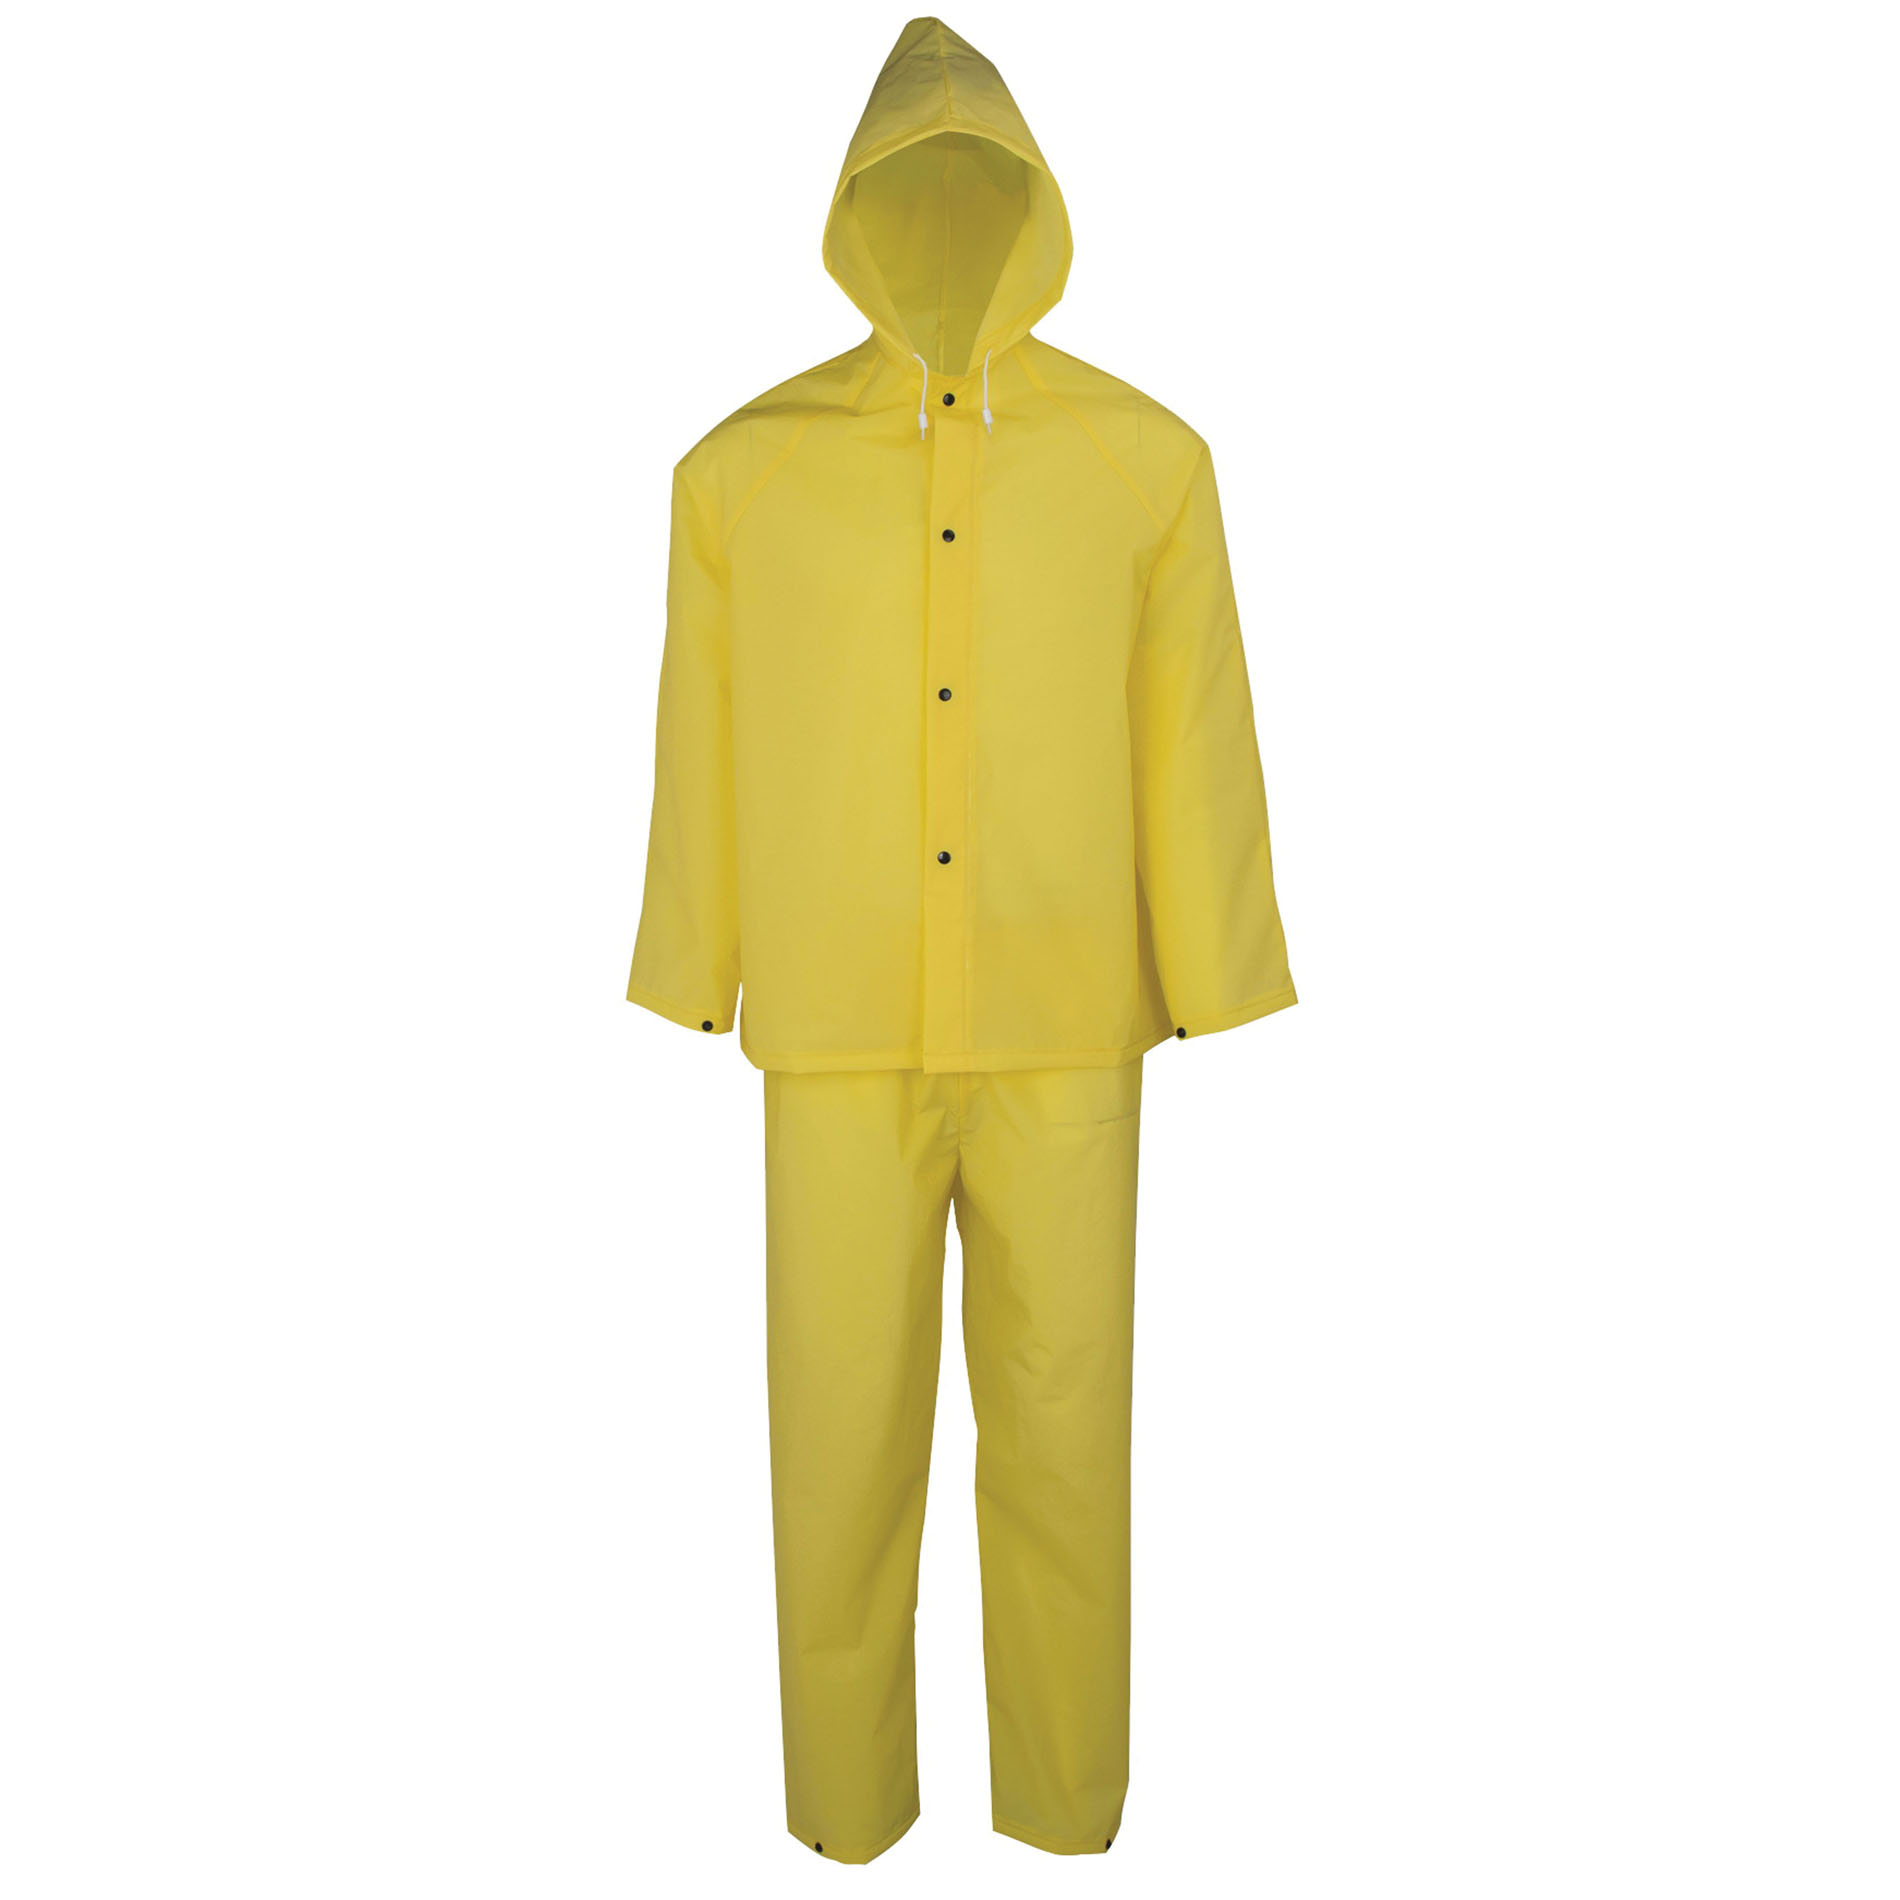 RS2-01-XXL Rain Suit, 2XL, 44 in Inseam, EVA, Yellow, Hooded Collar, Snap Down Storm Flap Closure